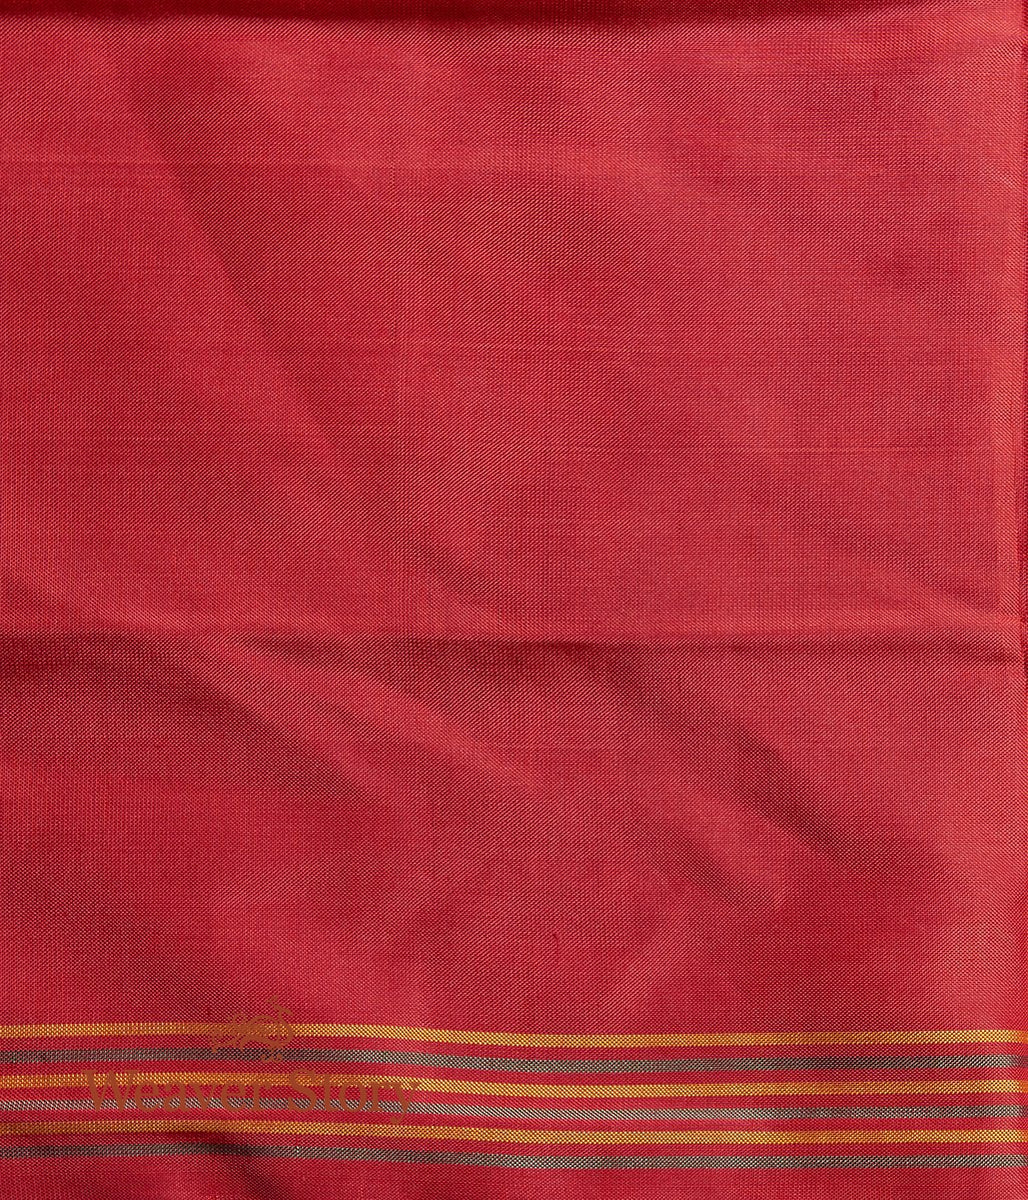 Handloom_Green_and_Red_Dual_Tone_Gujarat_Patola_Saree_with_Red_Border_WeaverStory_05